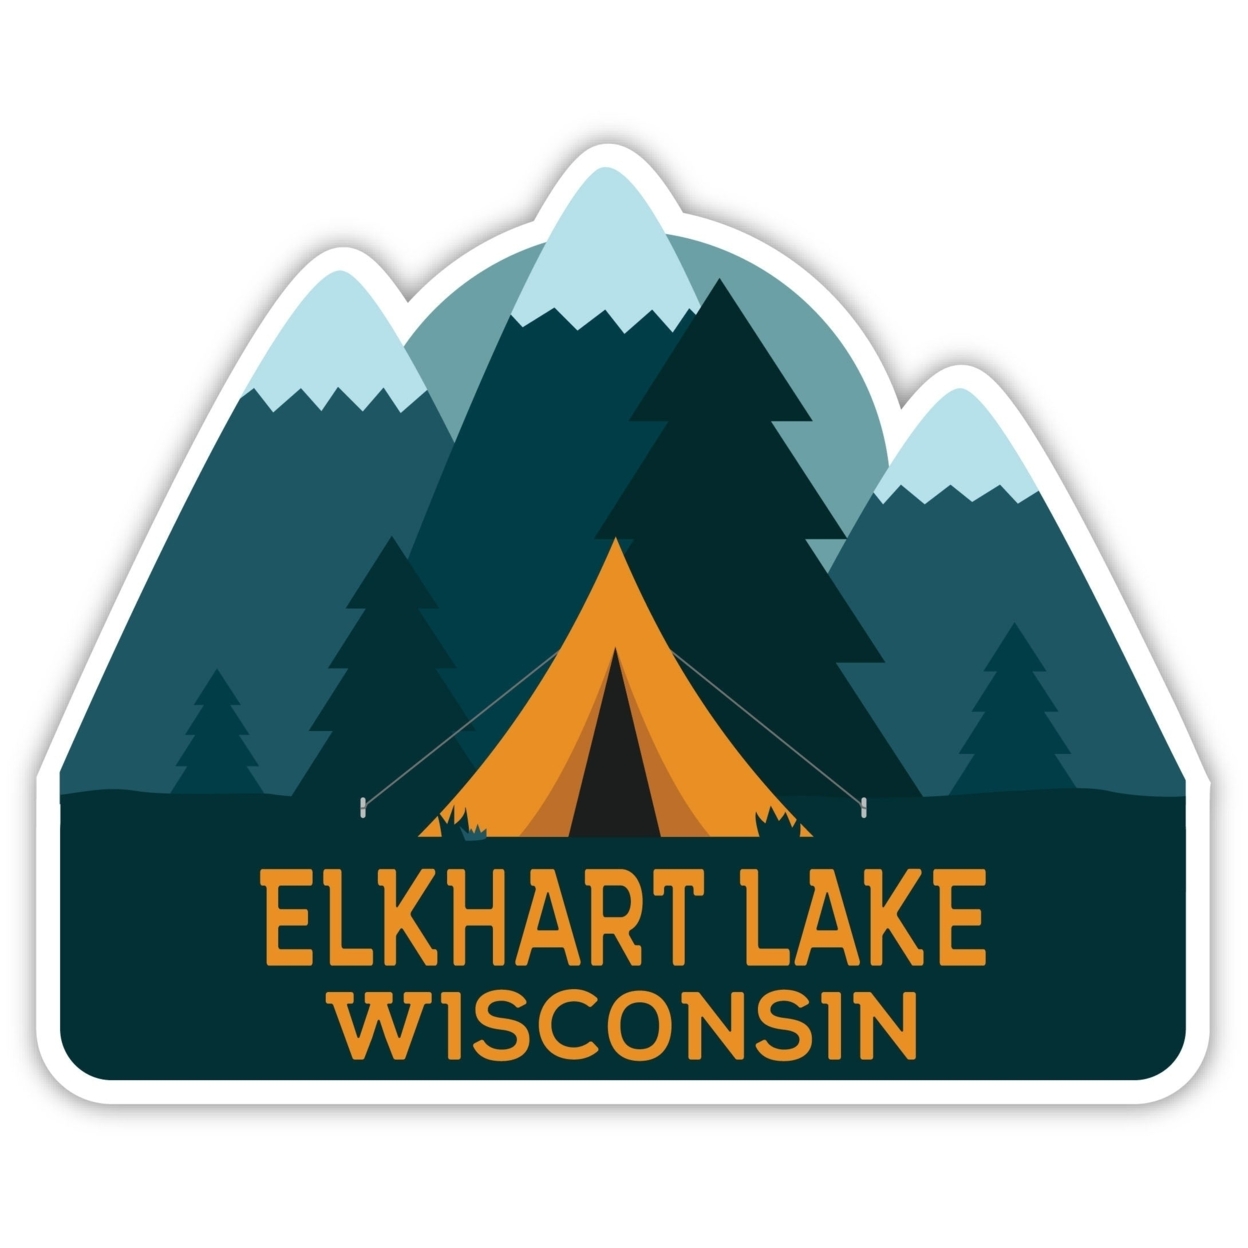 Elkhart Lake Wisconsin Souvenir Decorative Stickers (Choose Theme And Size) - 4-Pack, 12-Inch, Tent